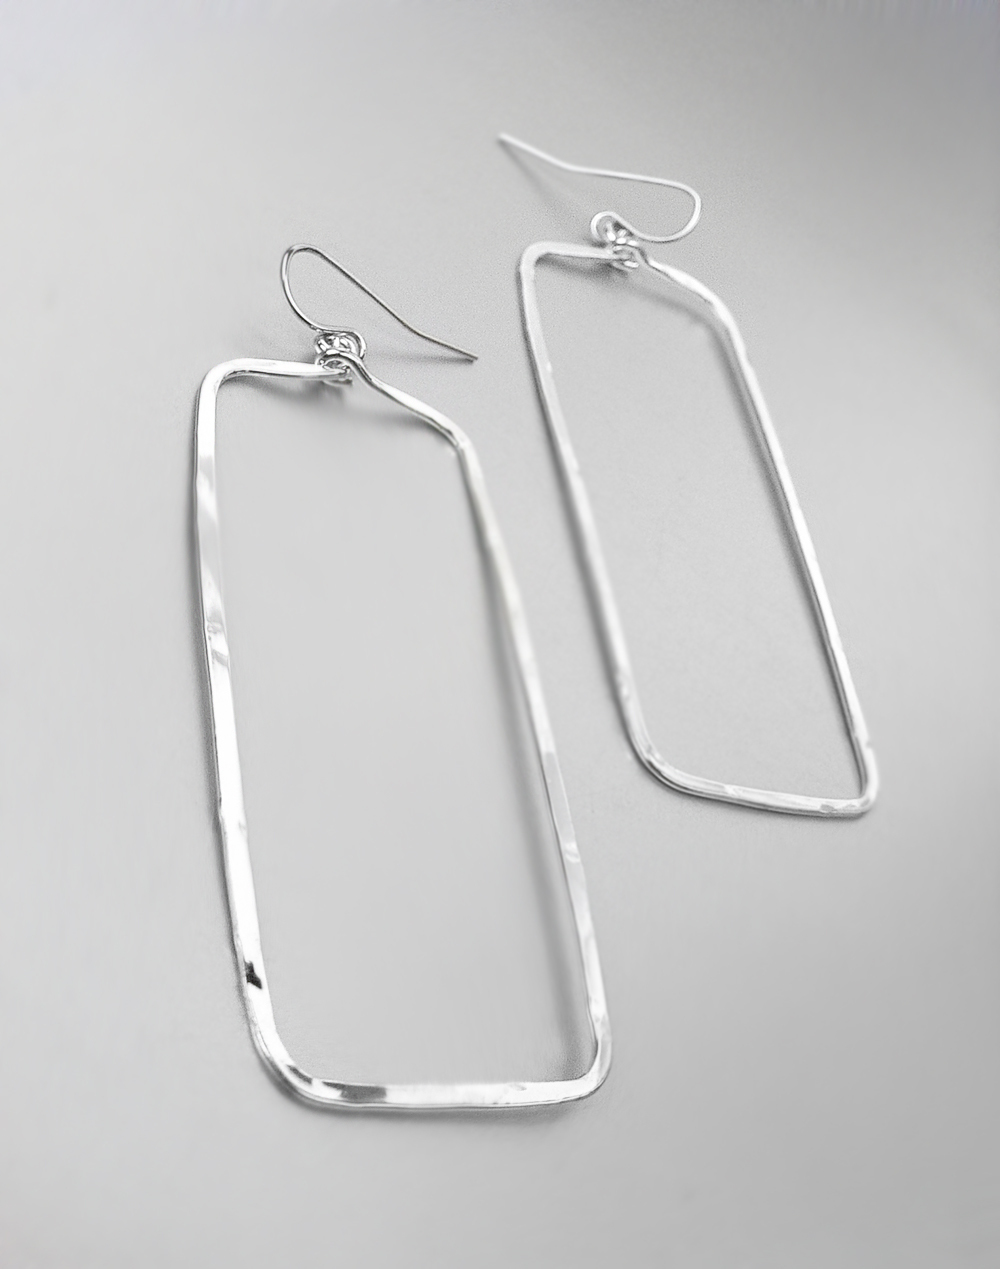 Primary image for GORGEOUS Lightweight Artisanal Flat Silver Long Rectangle Dangle Earrings CGS491